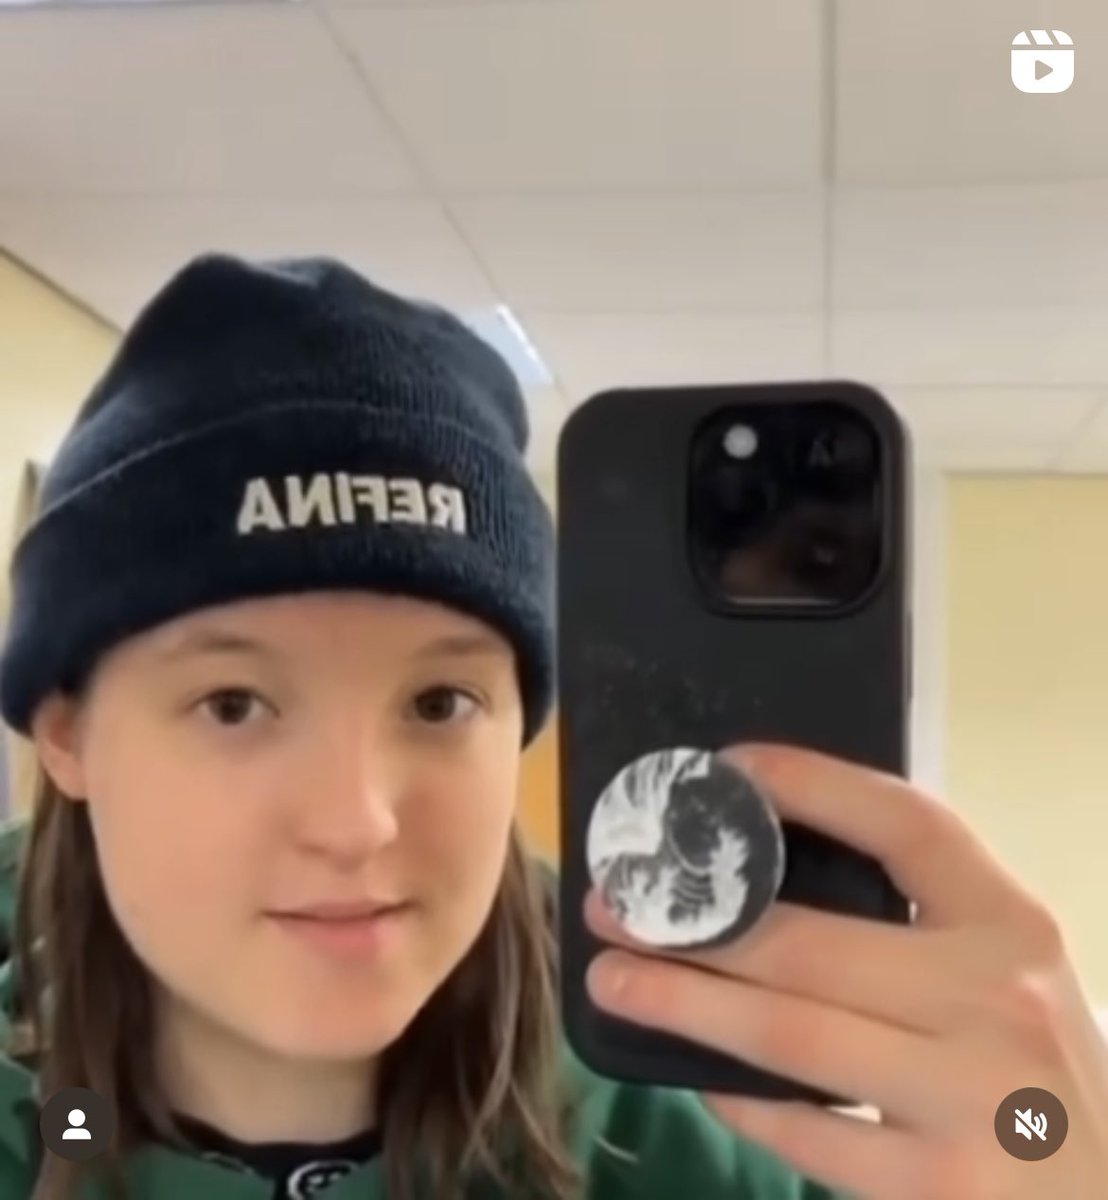 this video isn’t talked about enough and WHY IS THEIR POP SOCKET SO OFF CENTERED